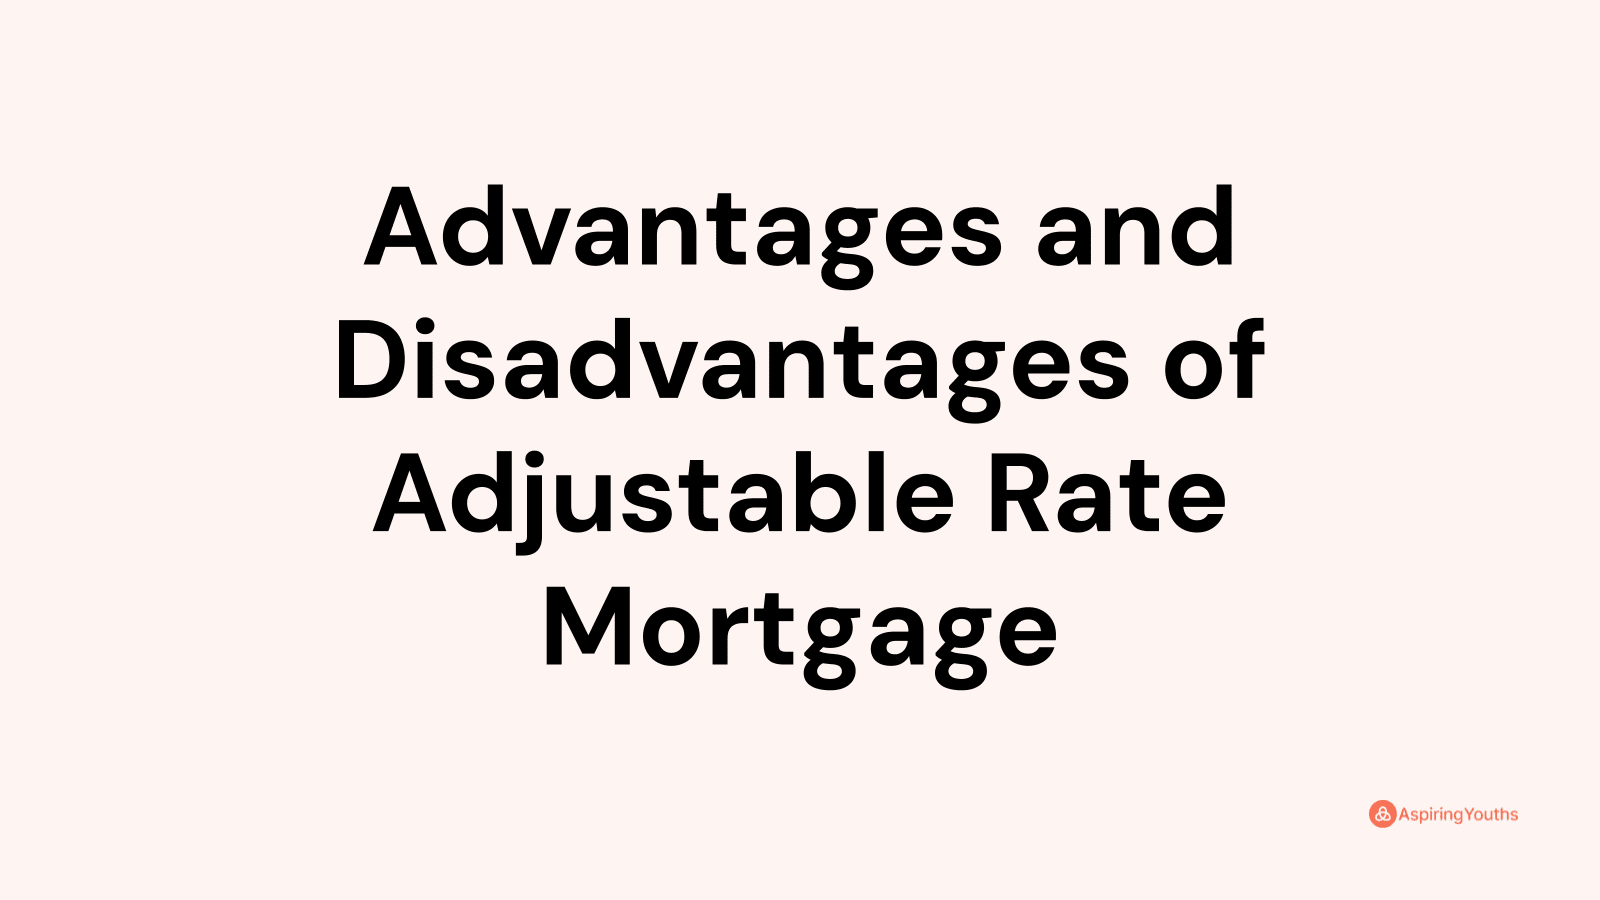 Advantages and disadvantages of Adjustable Rate Mortgage